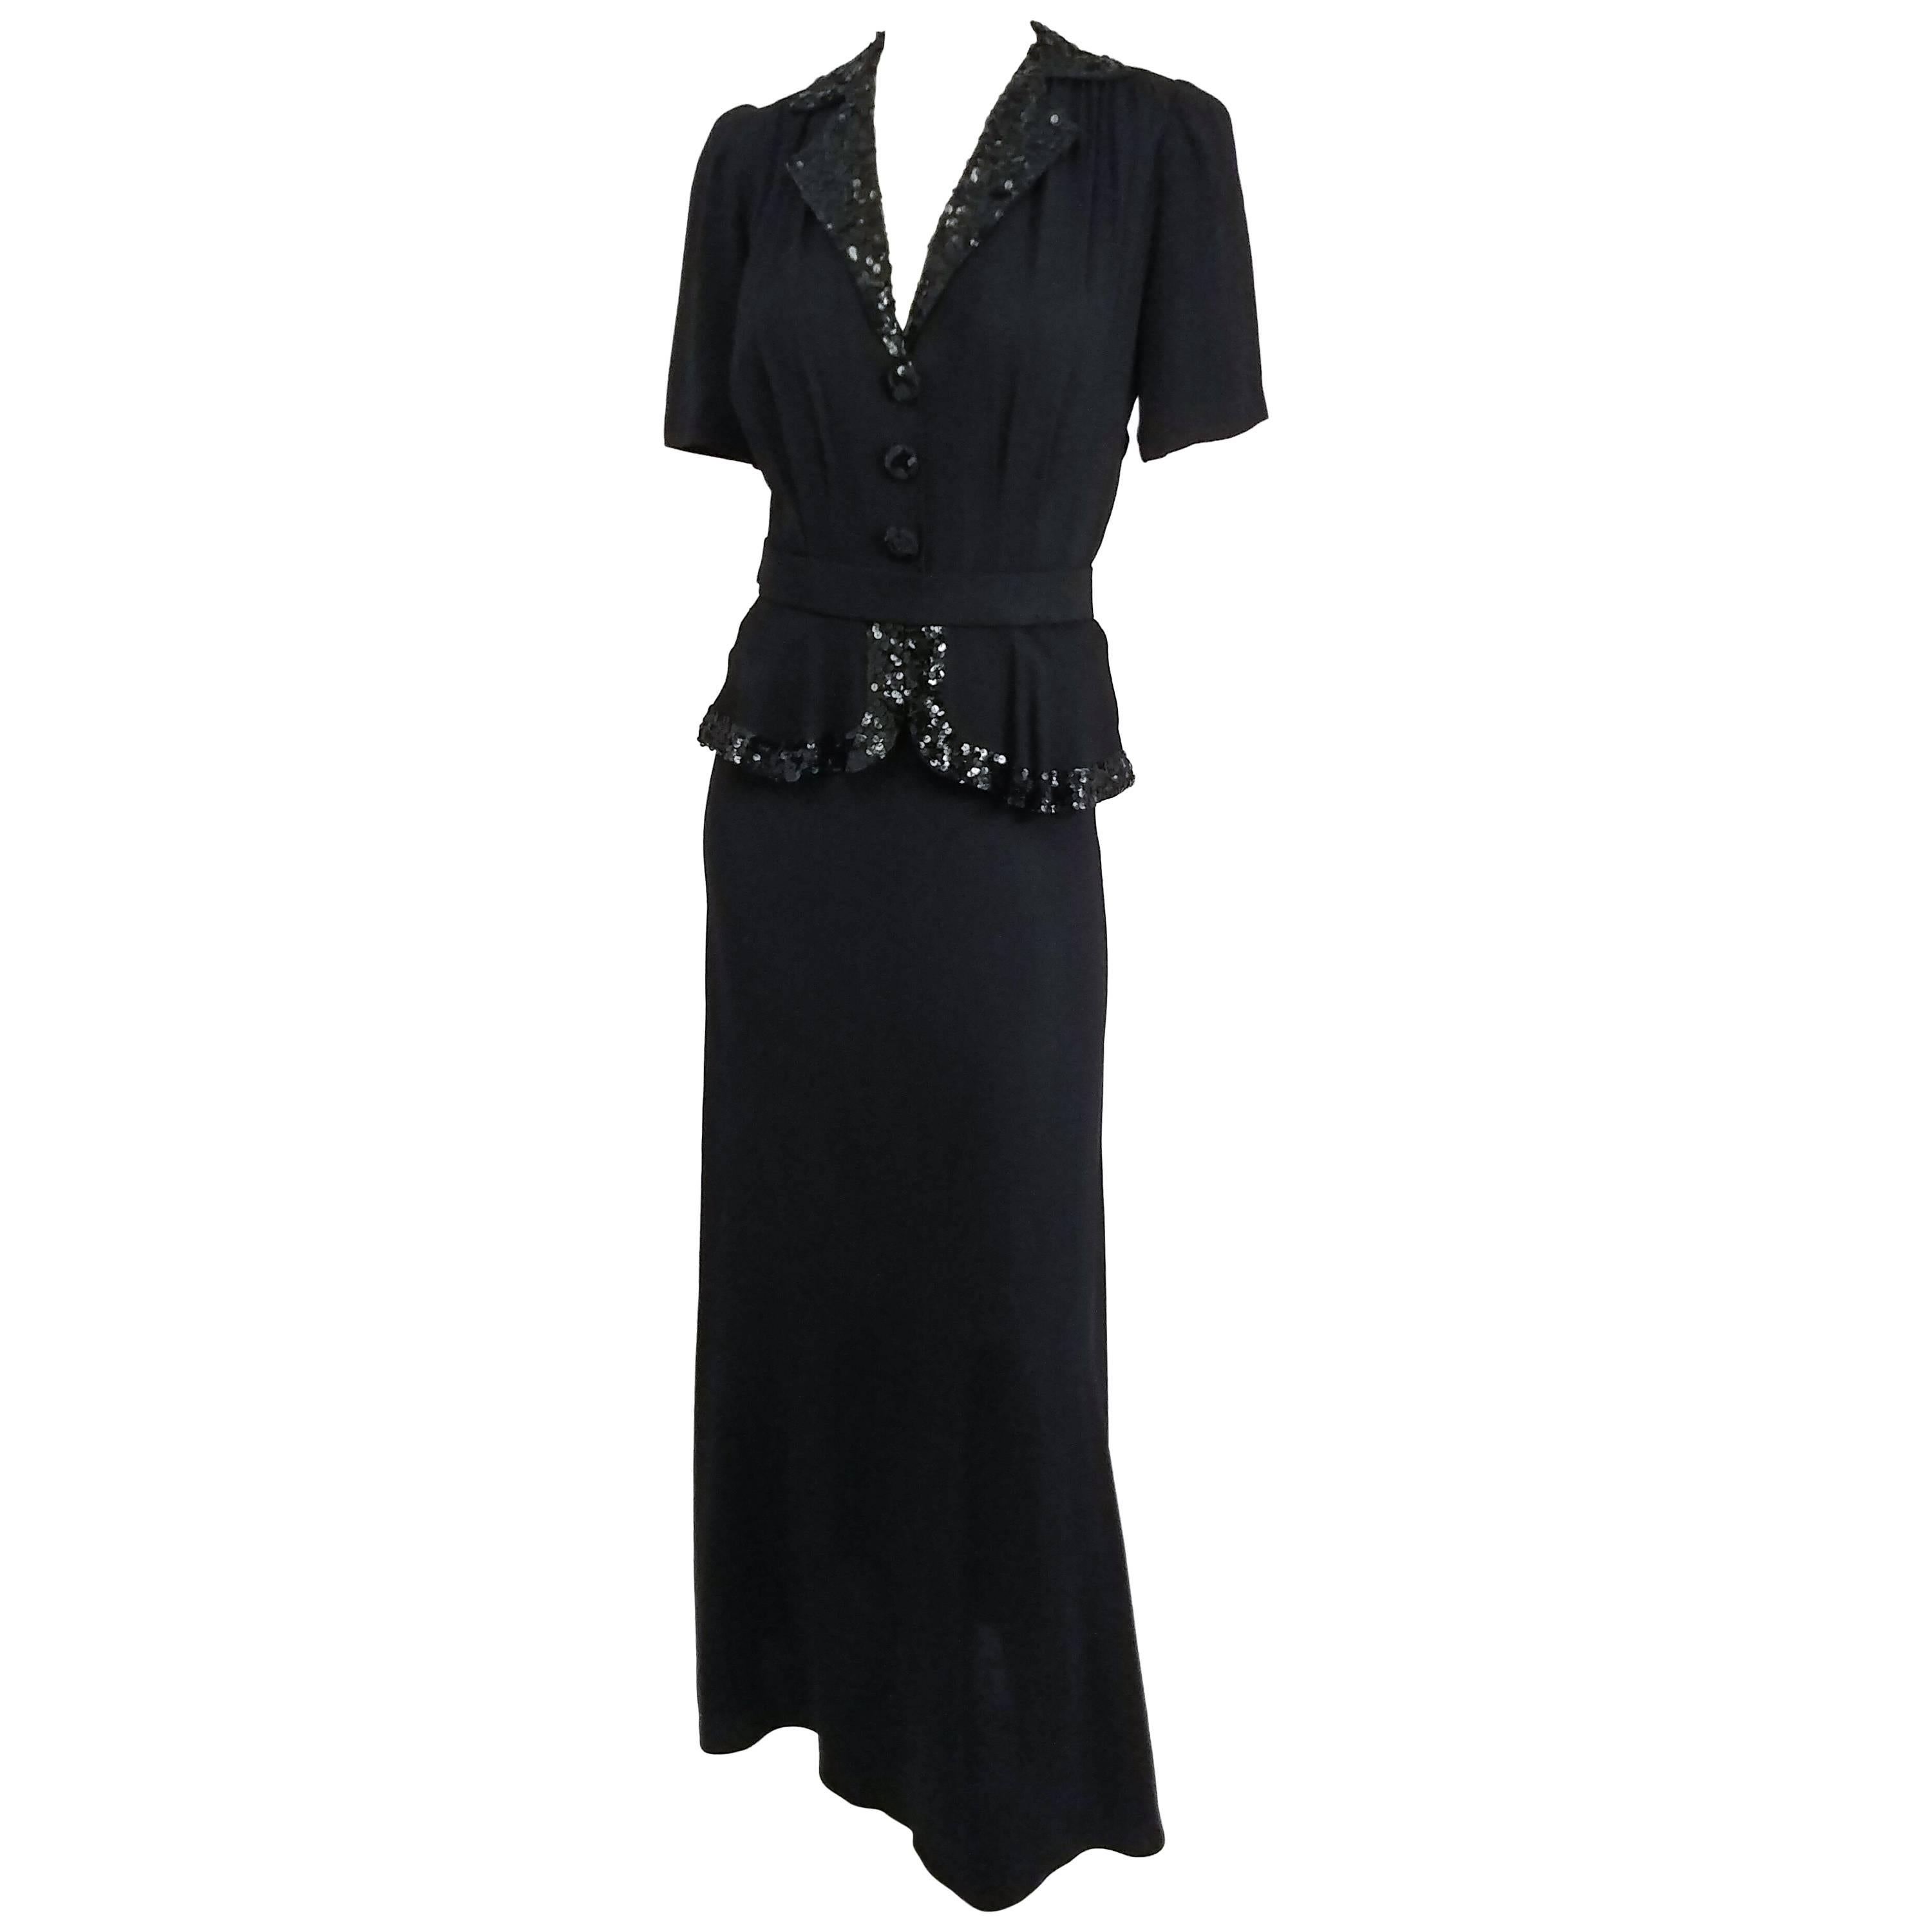 1930s Black Crepe Day Dress with Sequins